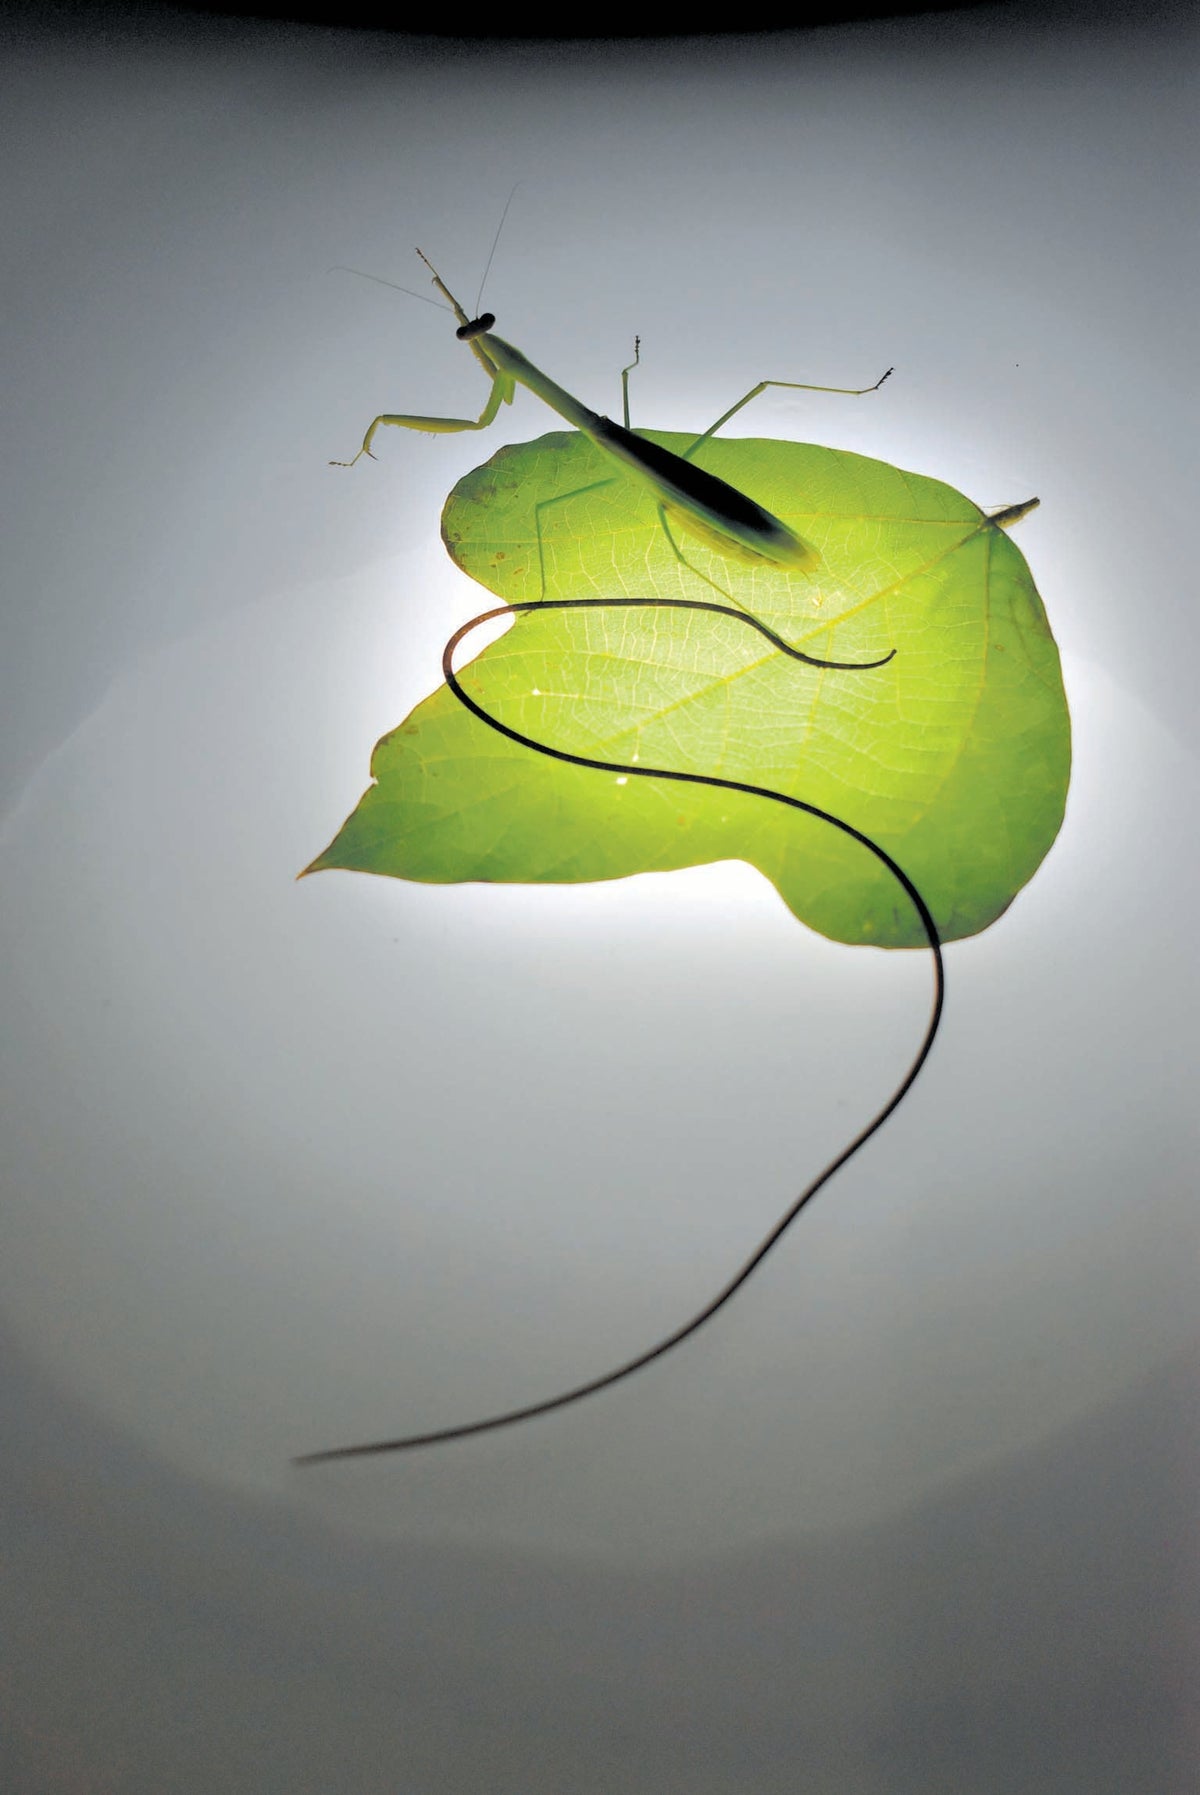 Parasitic worms use genes taken from mantises to manipulate them